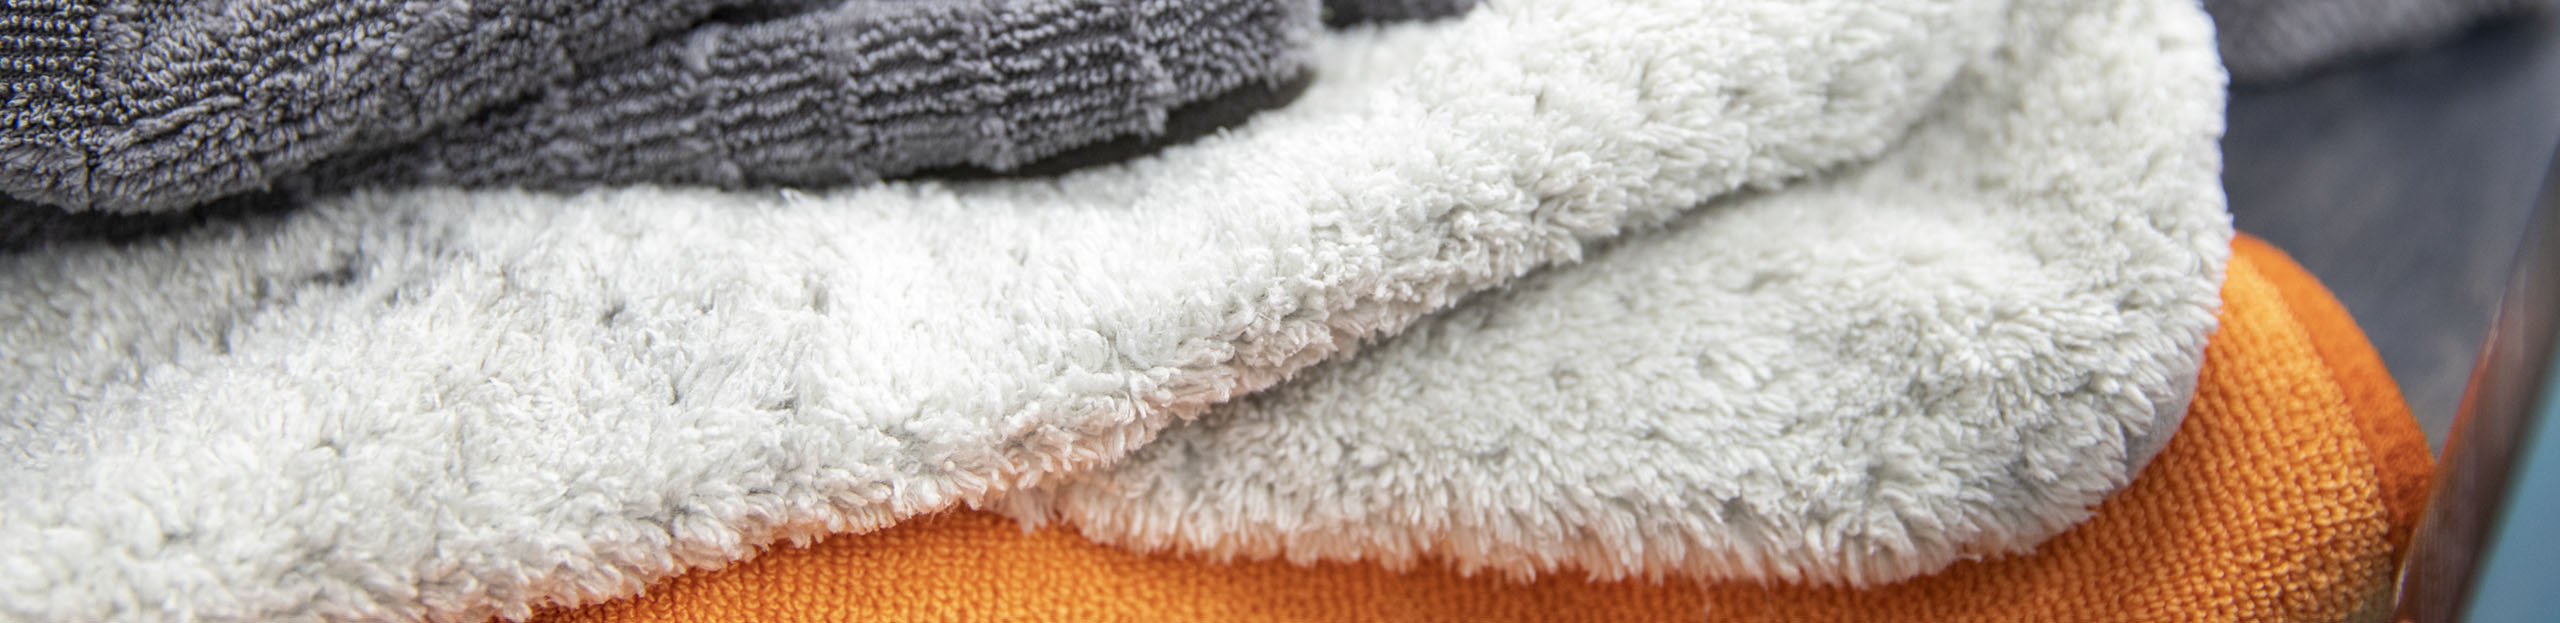 How To Wash and Care For Your Microfiber Towels: Rags To Riches